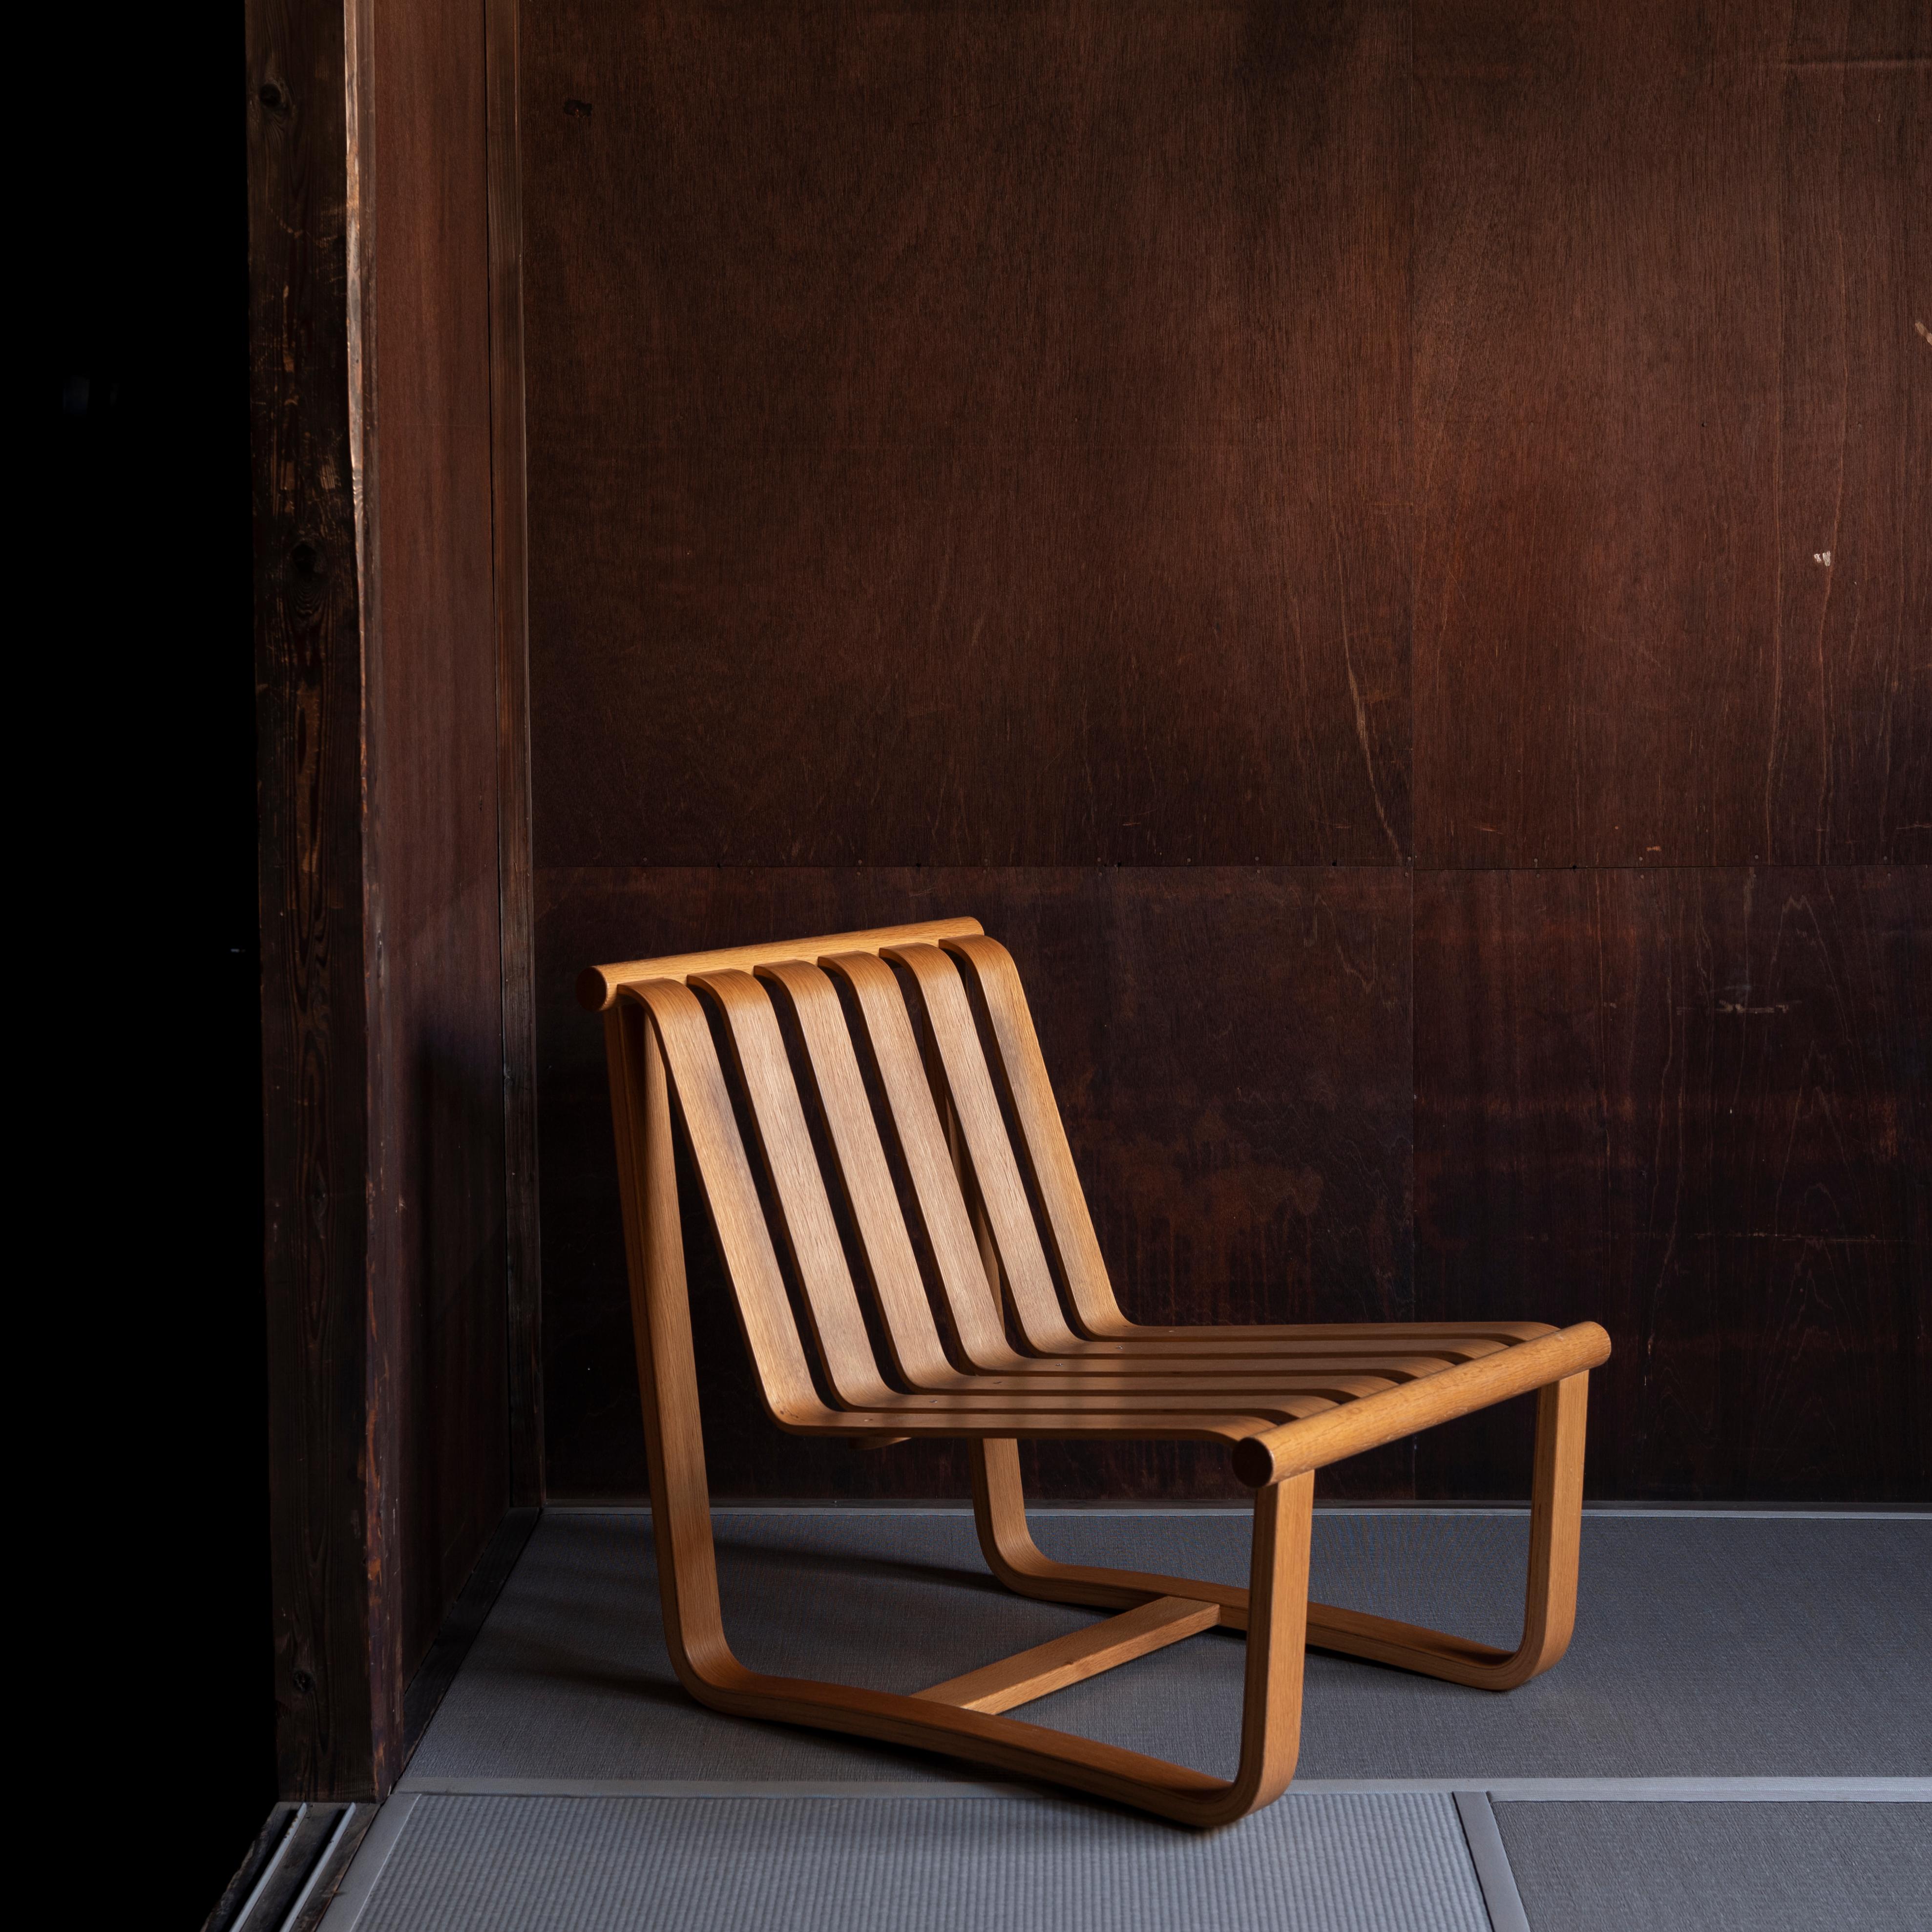 Lounge chair designed by Japanese designer Katsuo Matsumura (1923-1991) and manufactured by Tendo Mokko. Oak, plywood.
This model was released from Tendo Mokko in 1970, and it's already out of production.
This model is also designed to be used on